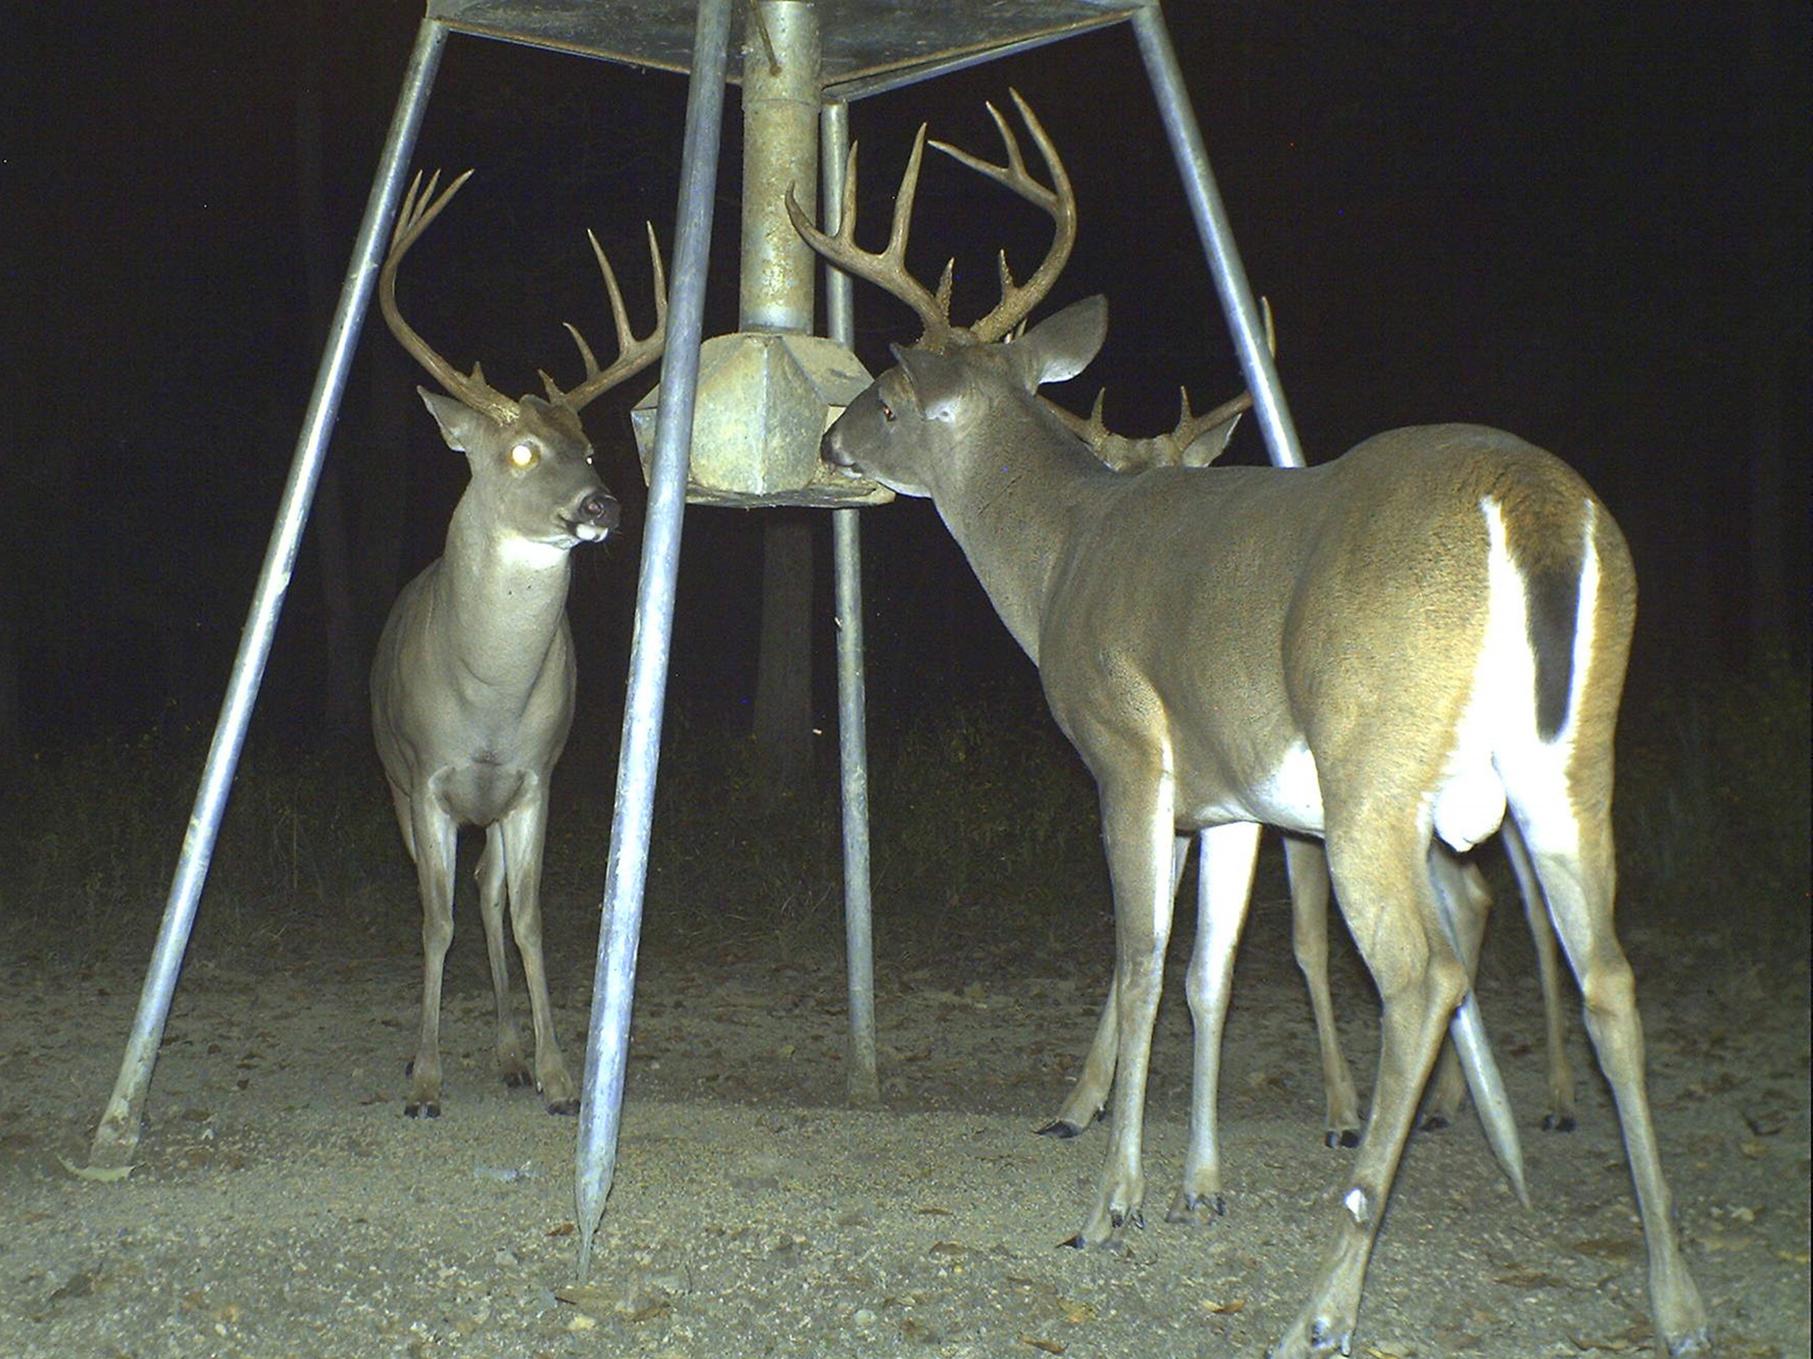 Now that it is legal to feed corn all year and hunt over grain on private lands during deer season, hunters may see fewer deer moving around after sunrise. (File photo by MSU Extension Service)